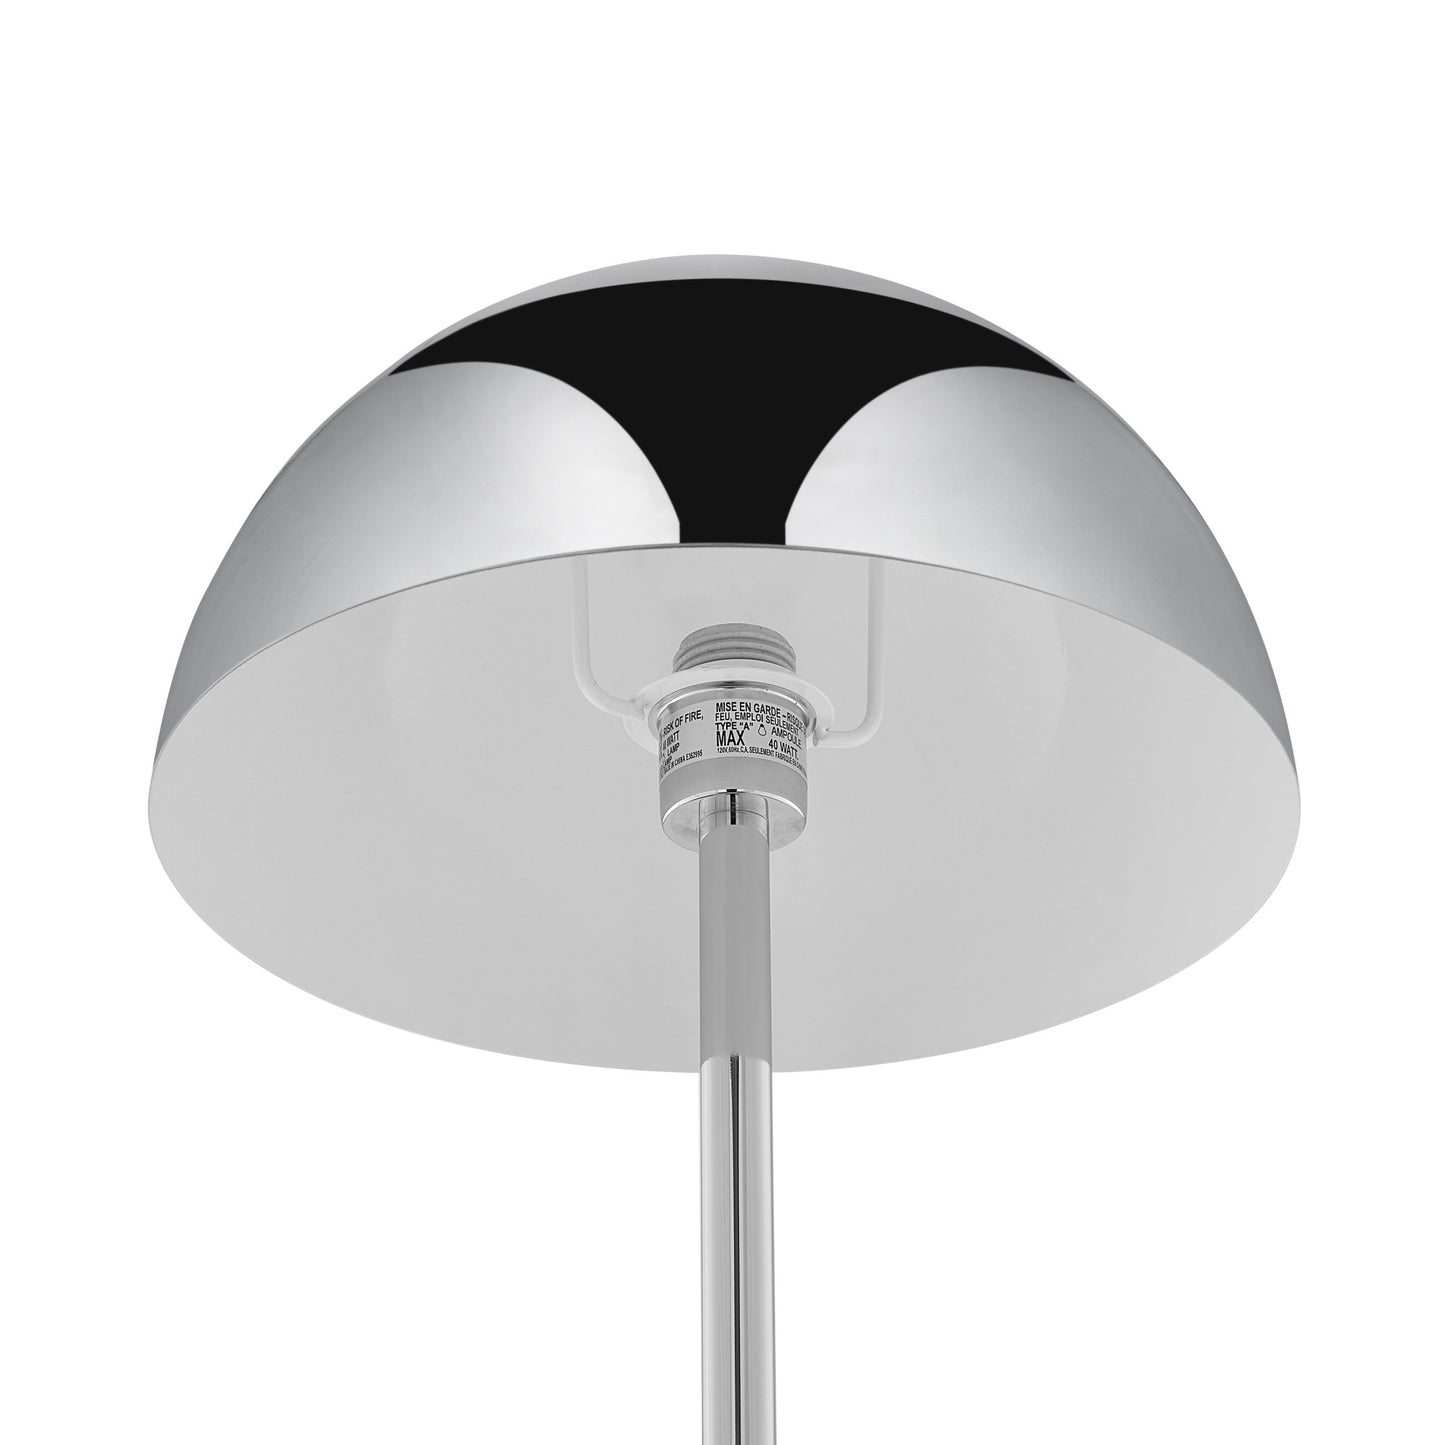 65" Chrome and White Floor Lamp With Silver Metallic Dome Shade